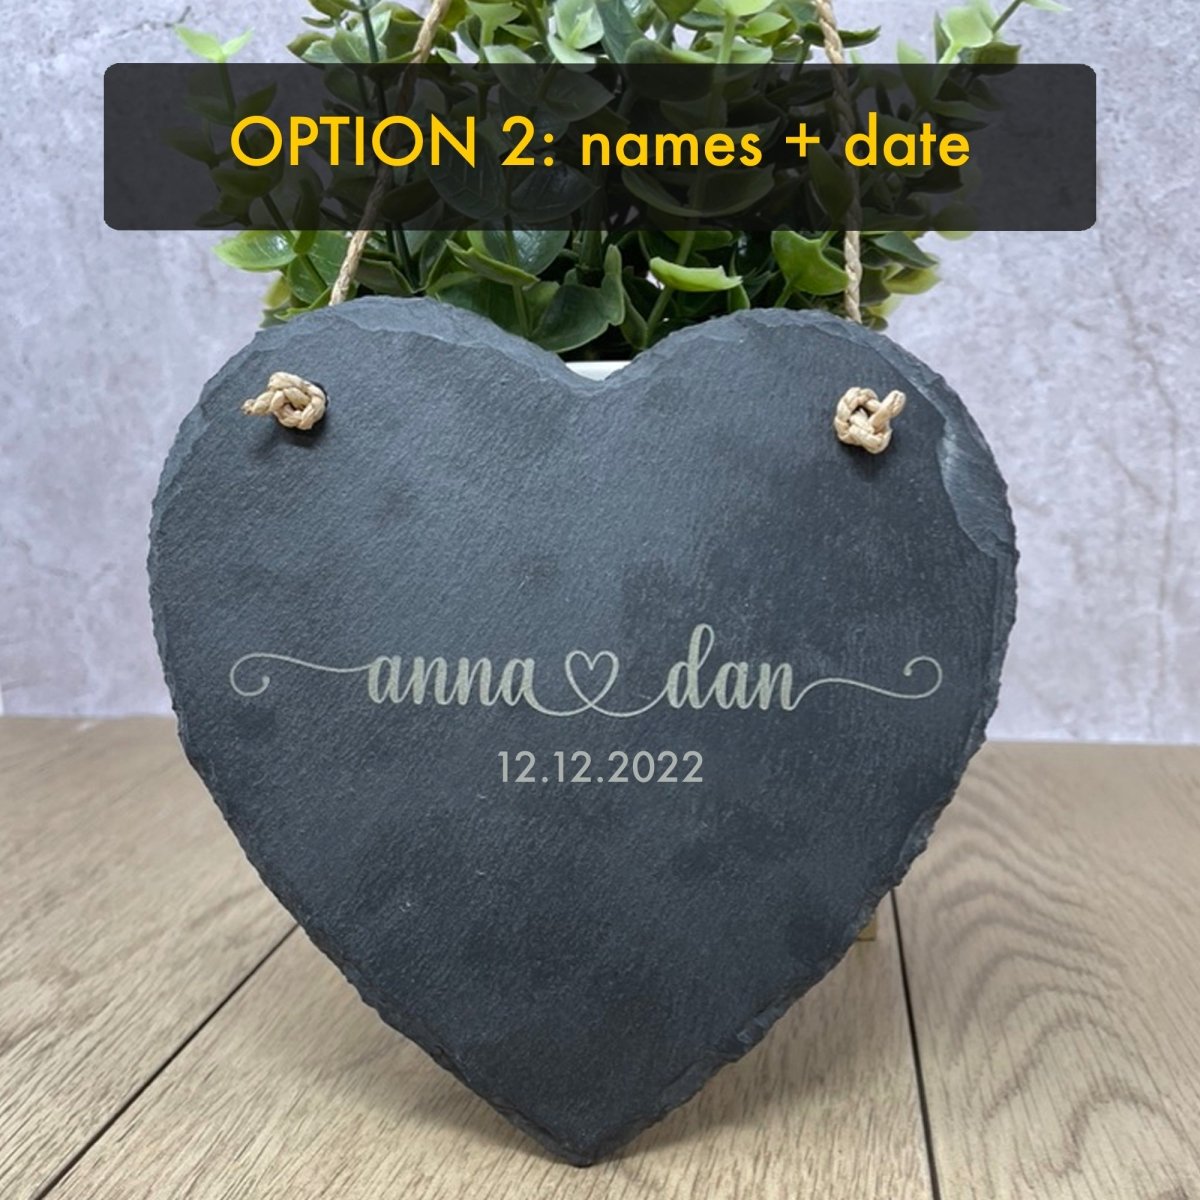 Personalised Slate Plaque Heart Shaped Plaque Engraved Valentines Gift 15x15cm Personalised 2. Names + date  Accessories Gifts UK